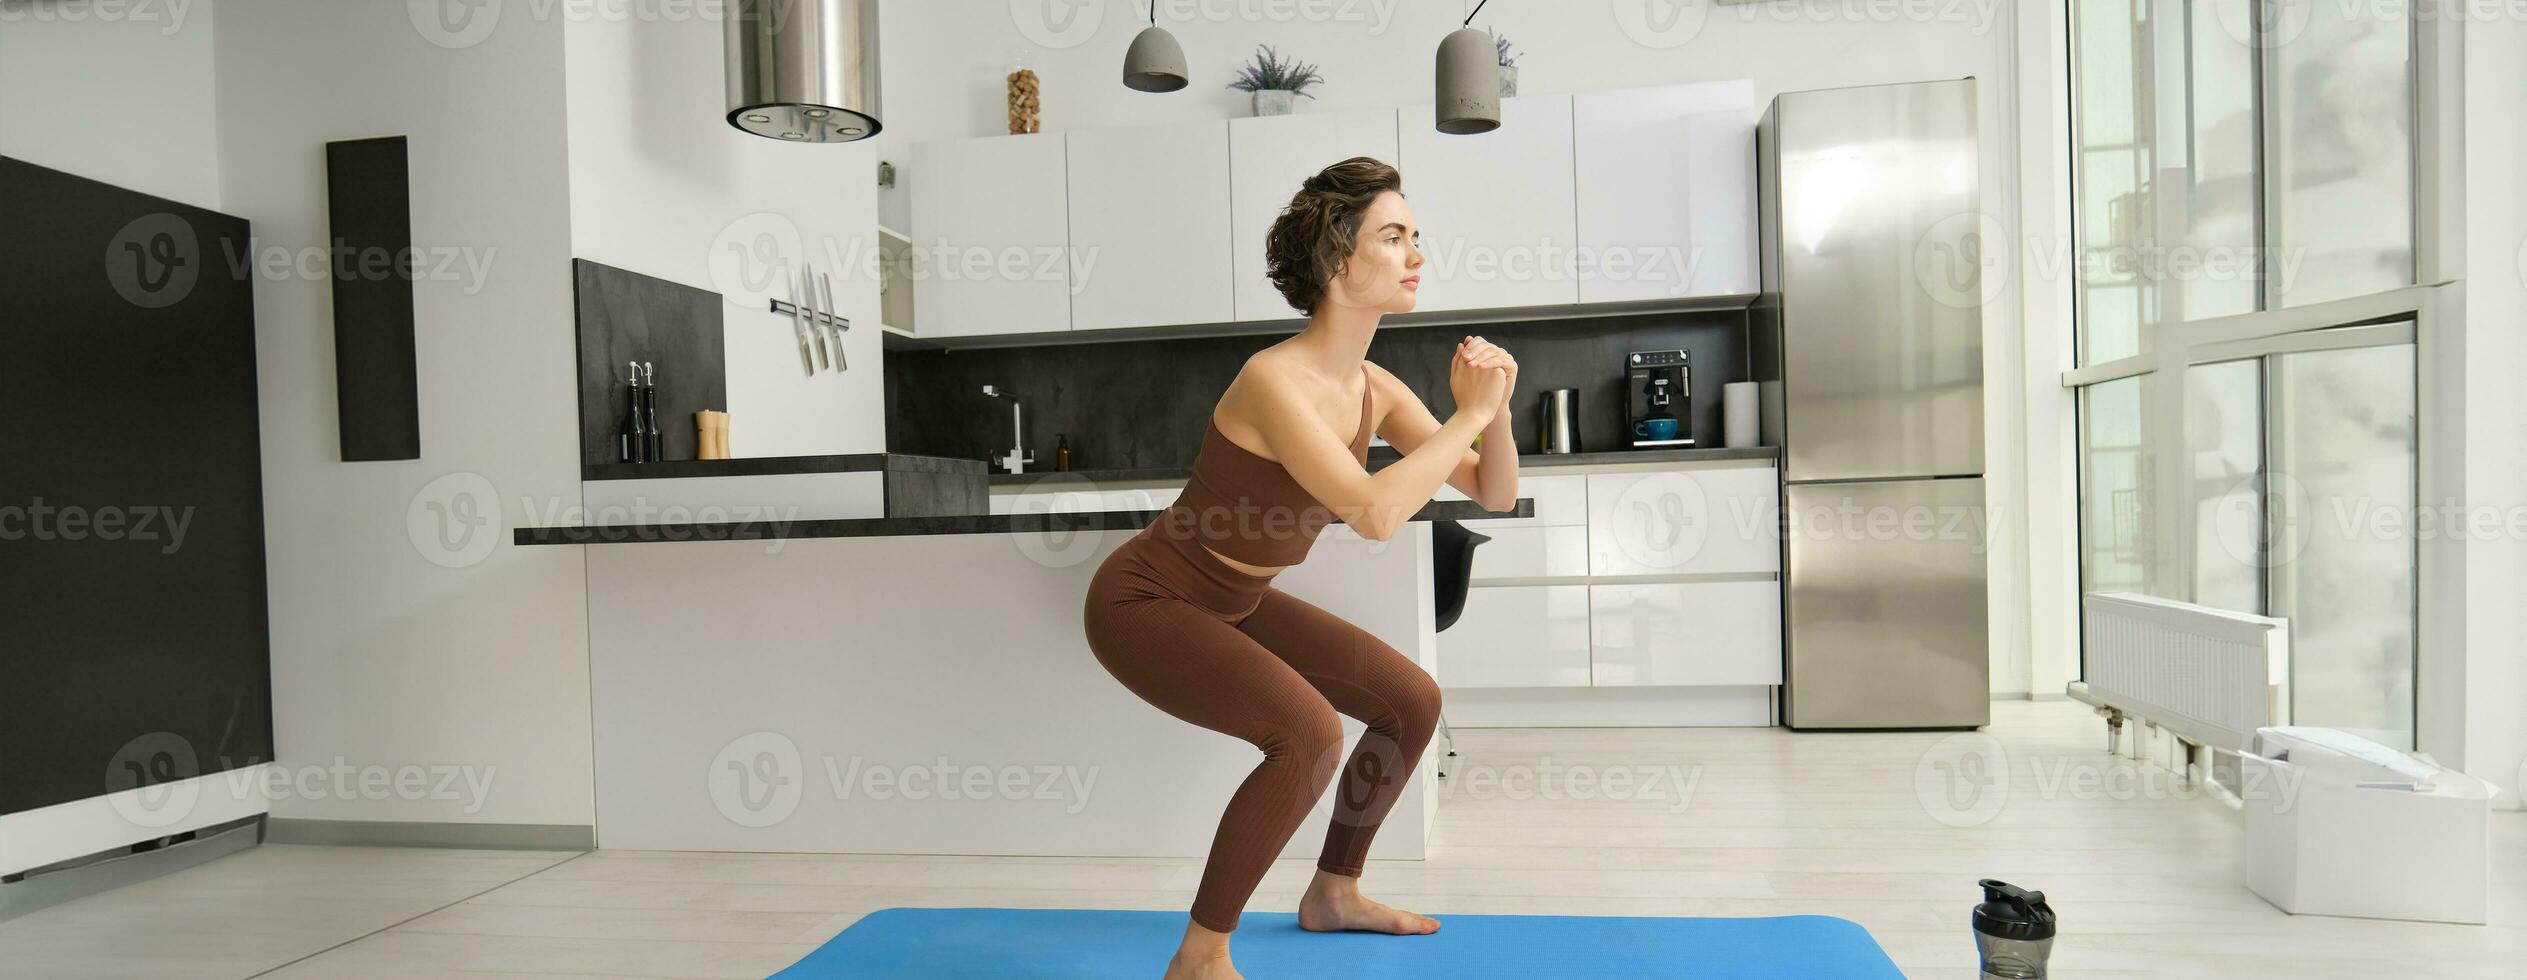 Gym at home. Young woman doing squats in bright room, workout indoors in sportswear, doing exercises on rubber yoga mat photo